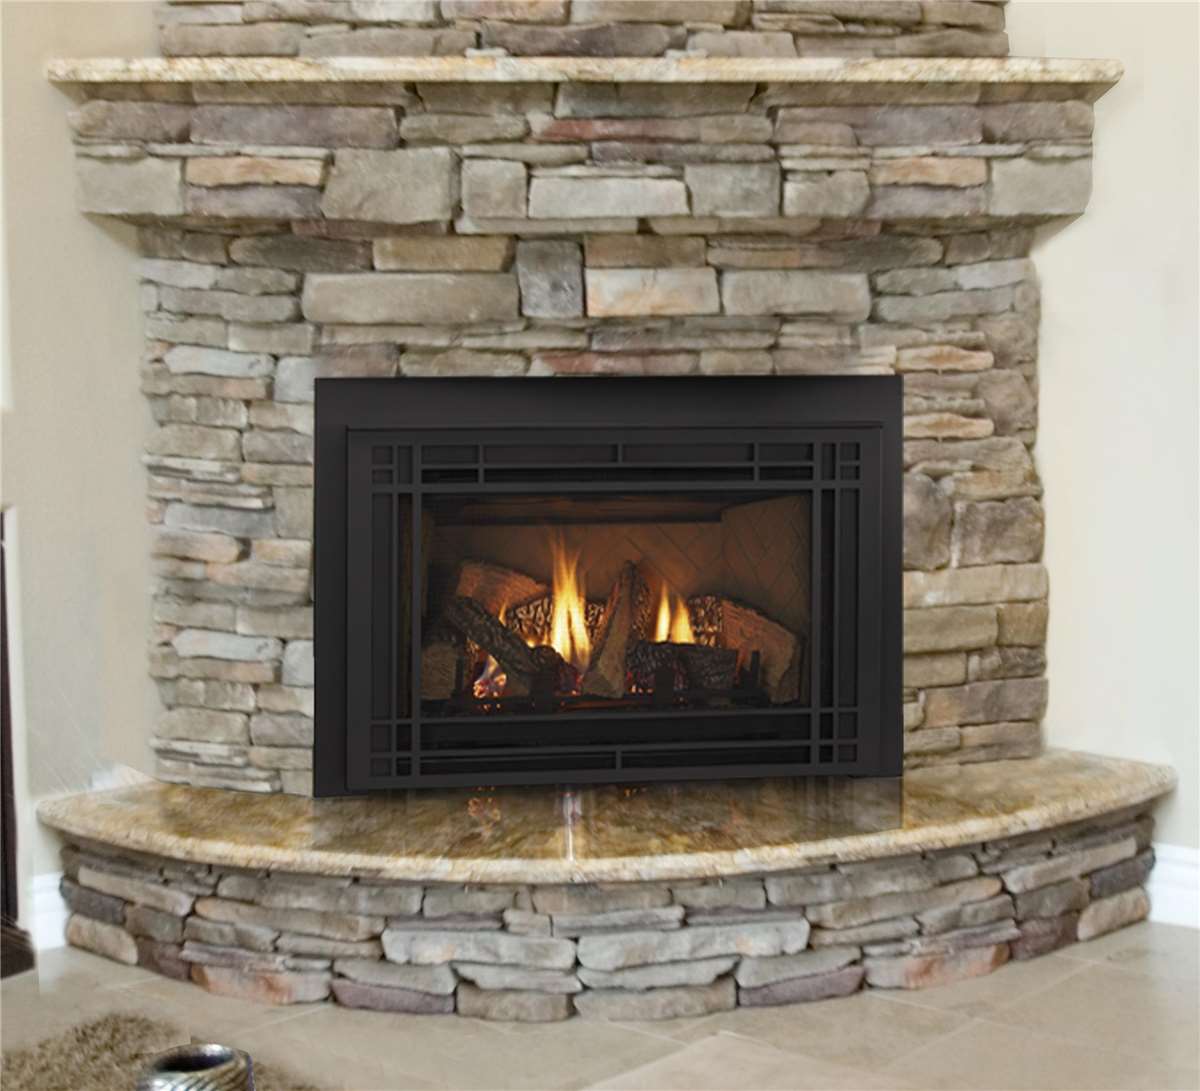 QFI35F direct vent gas insert shown with black Prairie-style firescreen front.  All fronts shown here are available in black and Sienna bronze.